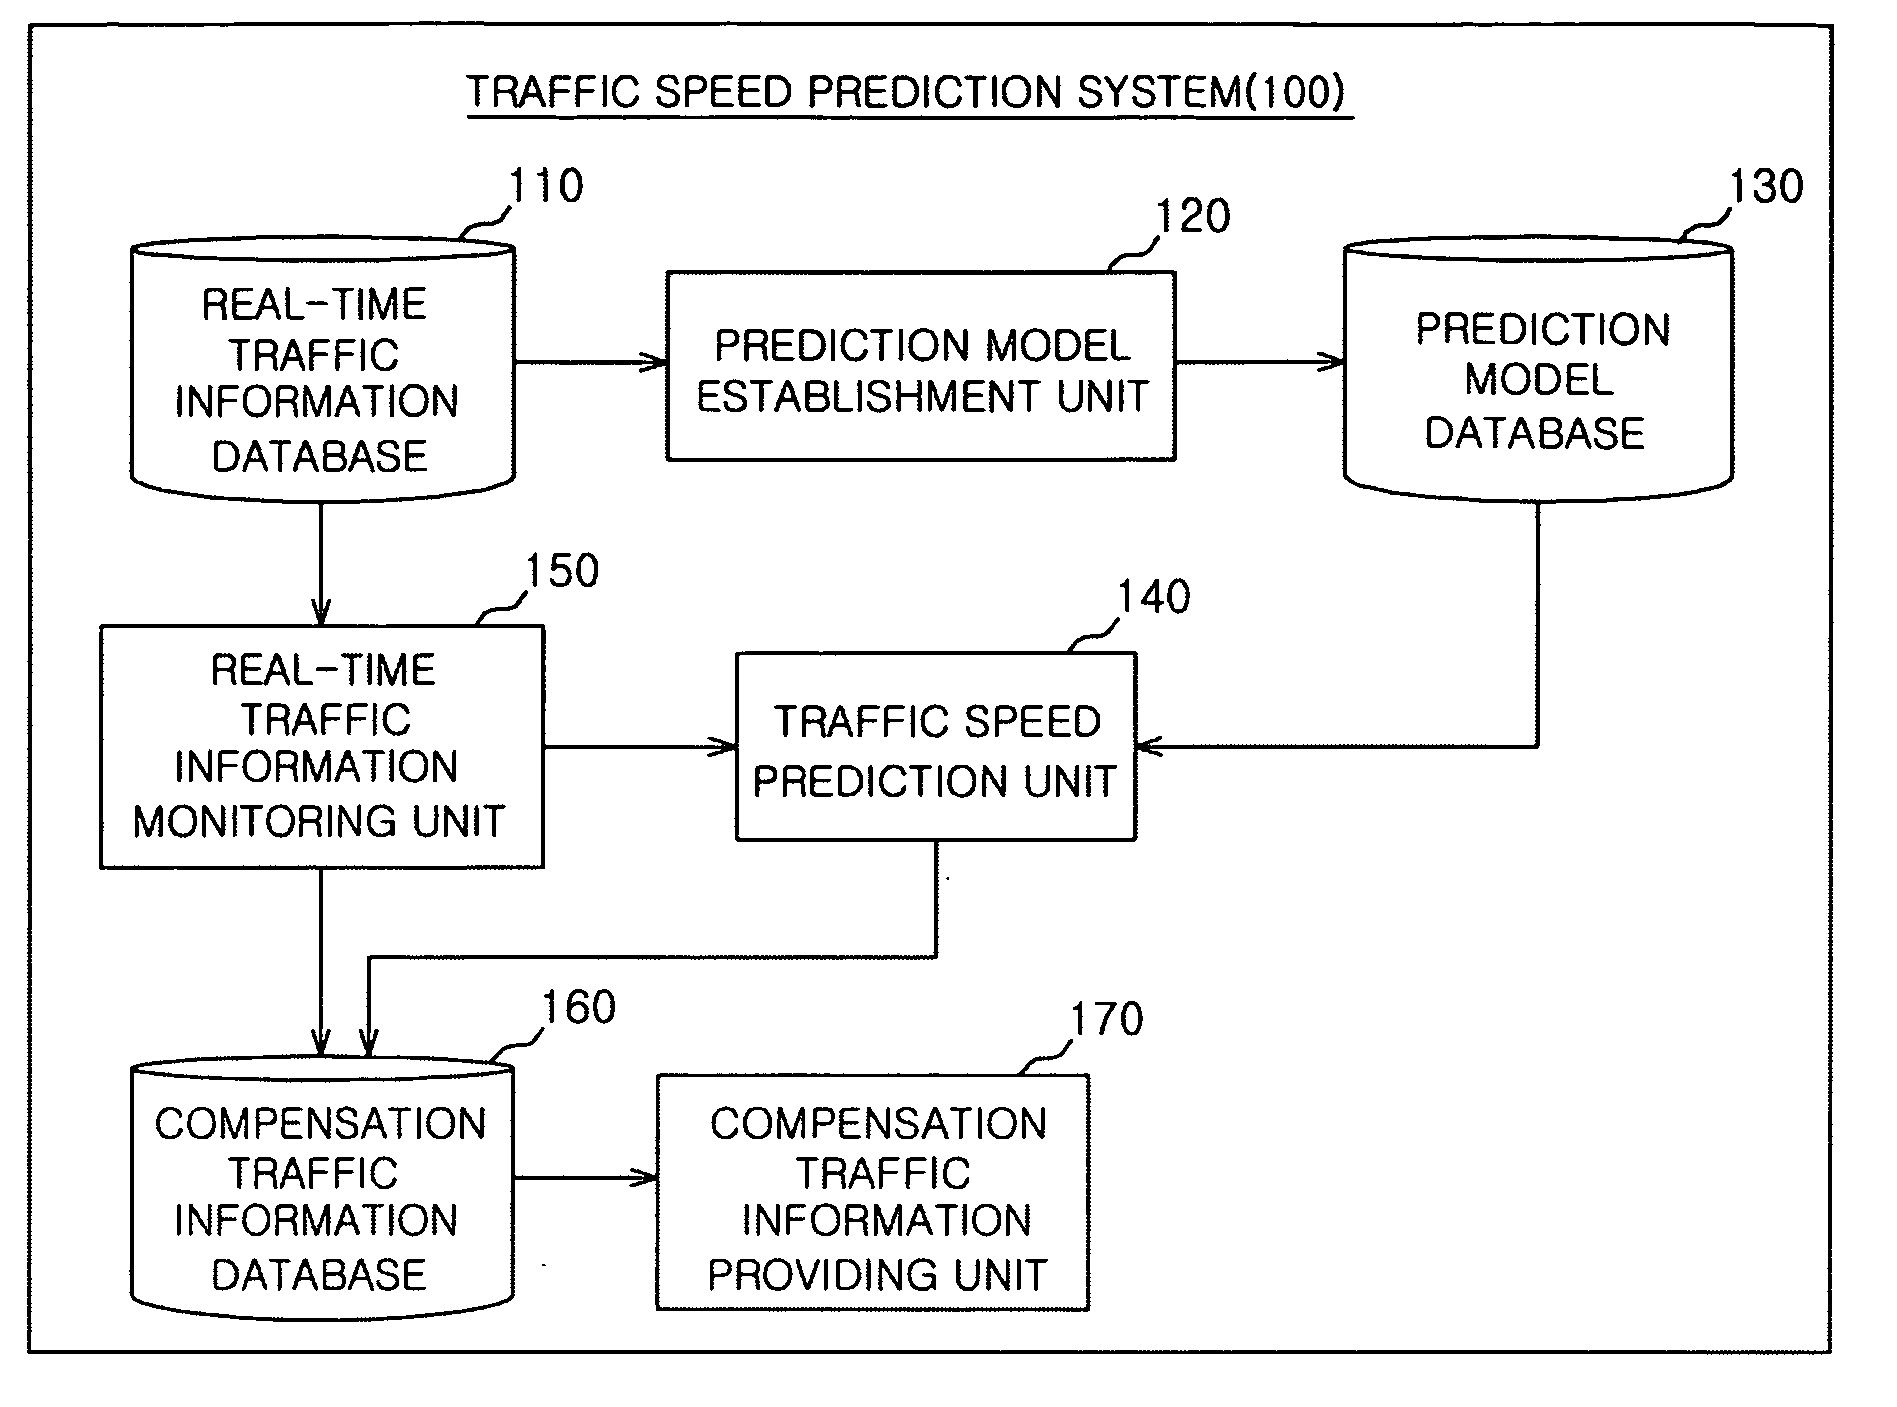 System and method of predicting traffic speed based on speed of neighboring link